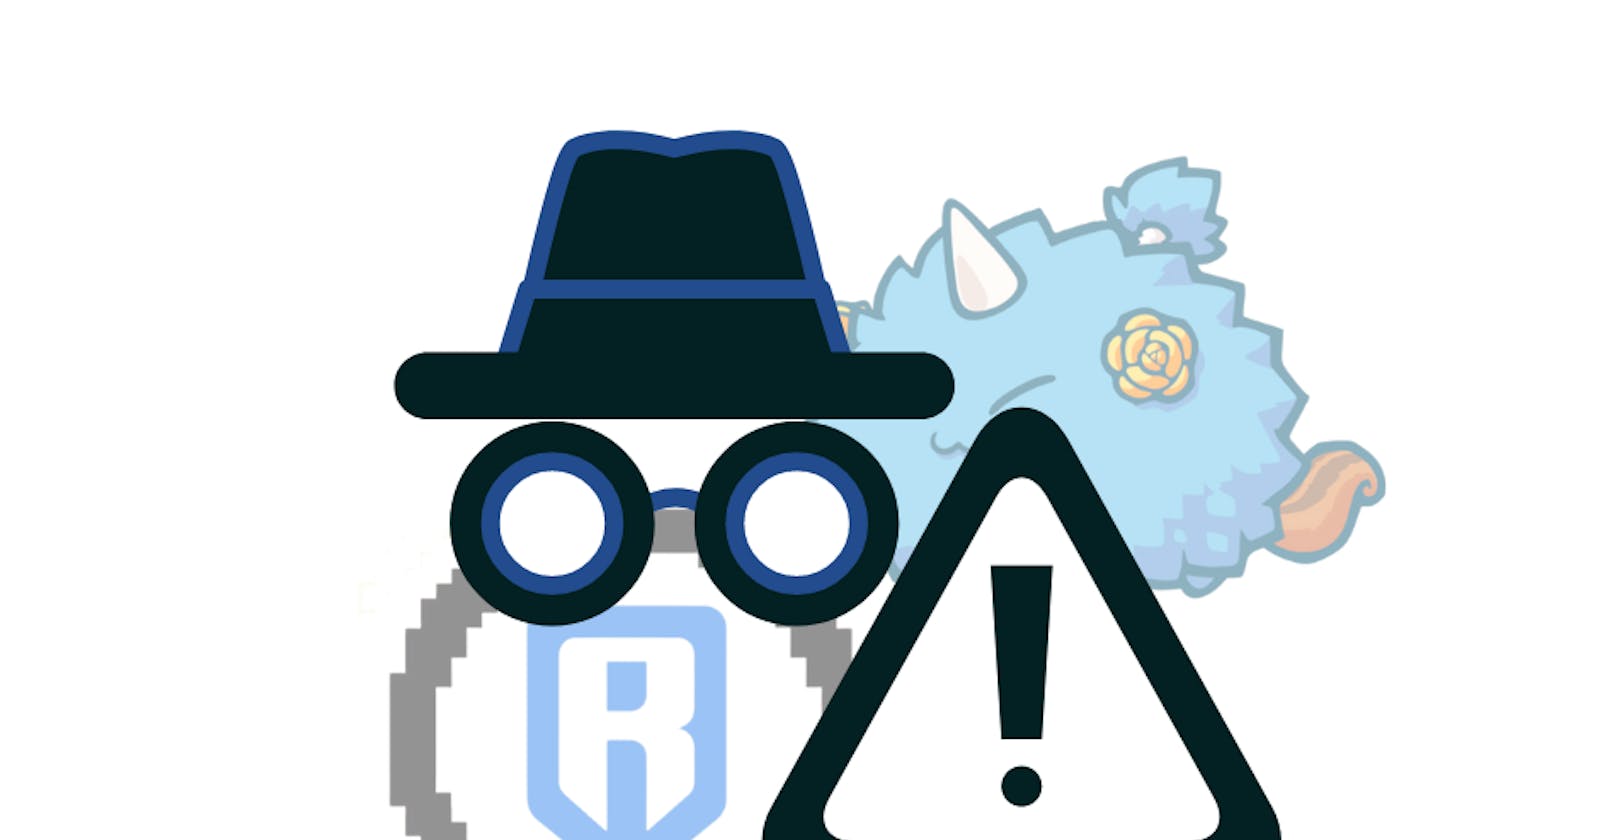 Ronin network - Axie infinity lost 173,600 ETH and 25.5M USDC - what is your hypothesis?